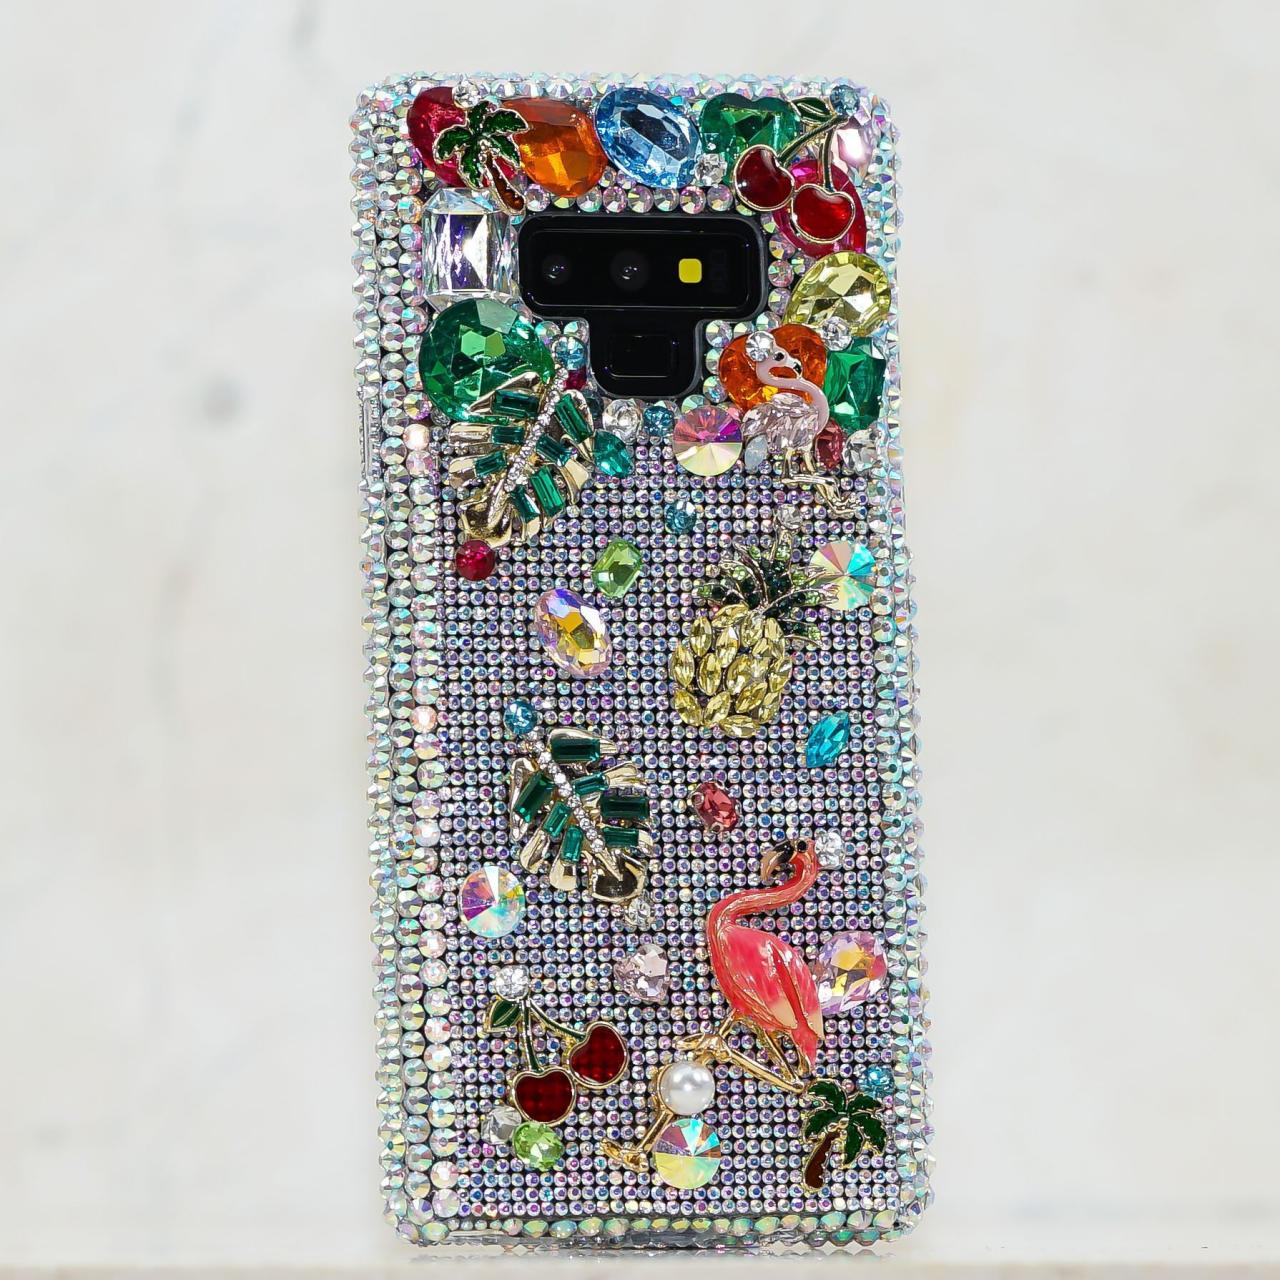 Bling Flamingo Design Genuine AB Crystals Diamond Sparkle Case For iPhone X XS Max XR 7 8 Plus Samsung Galaxy S9 plus Note 9